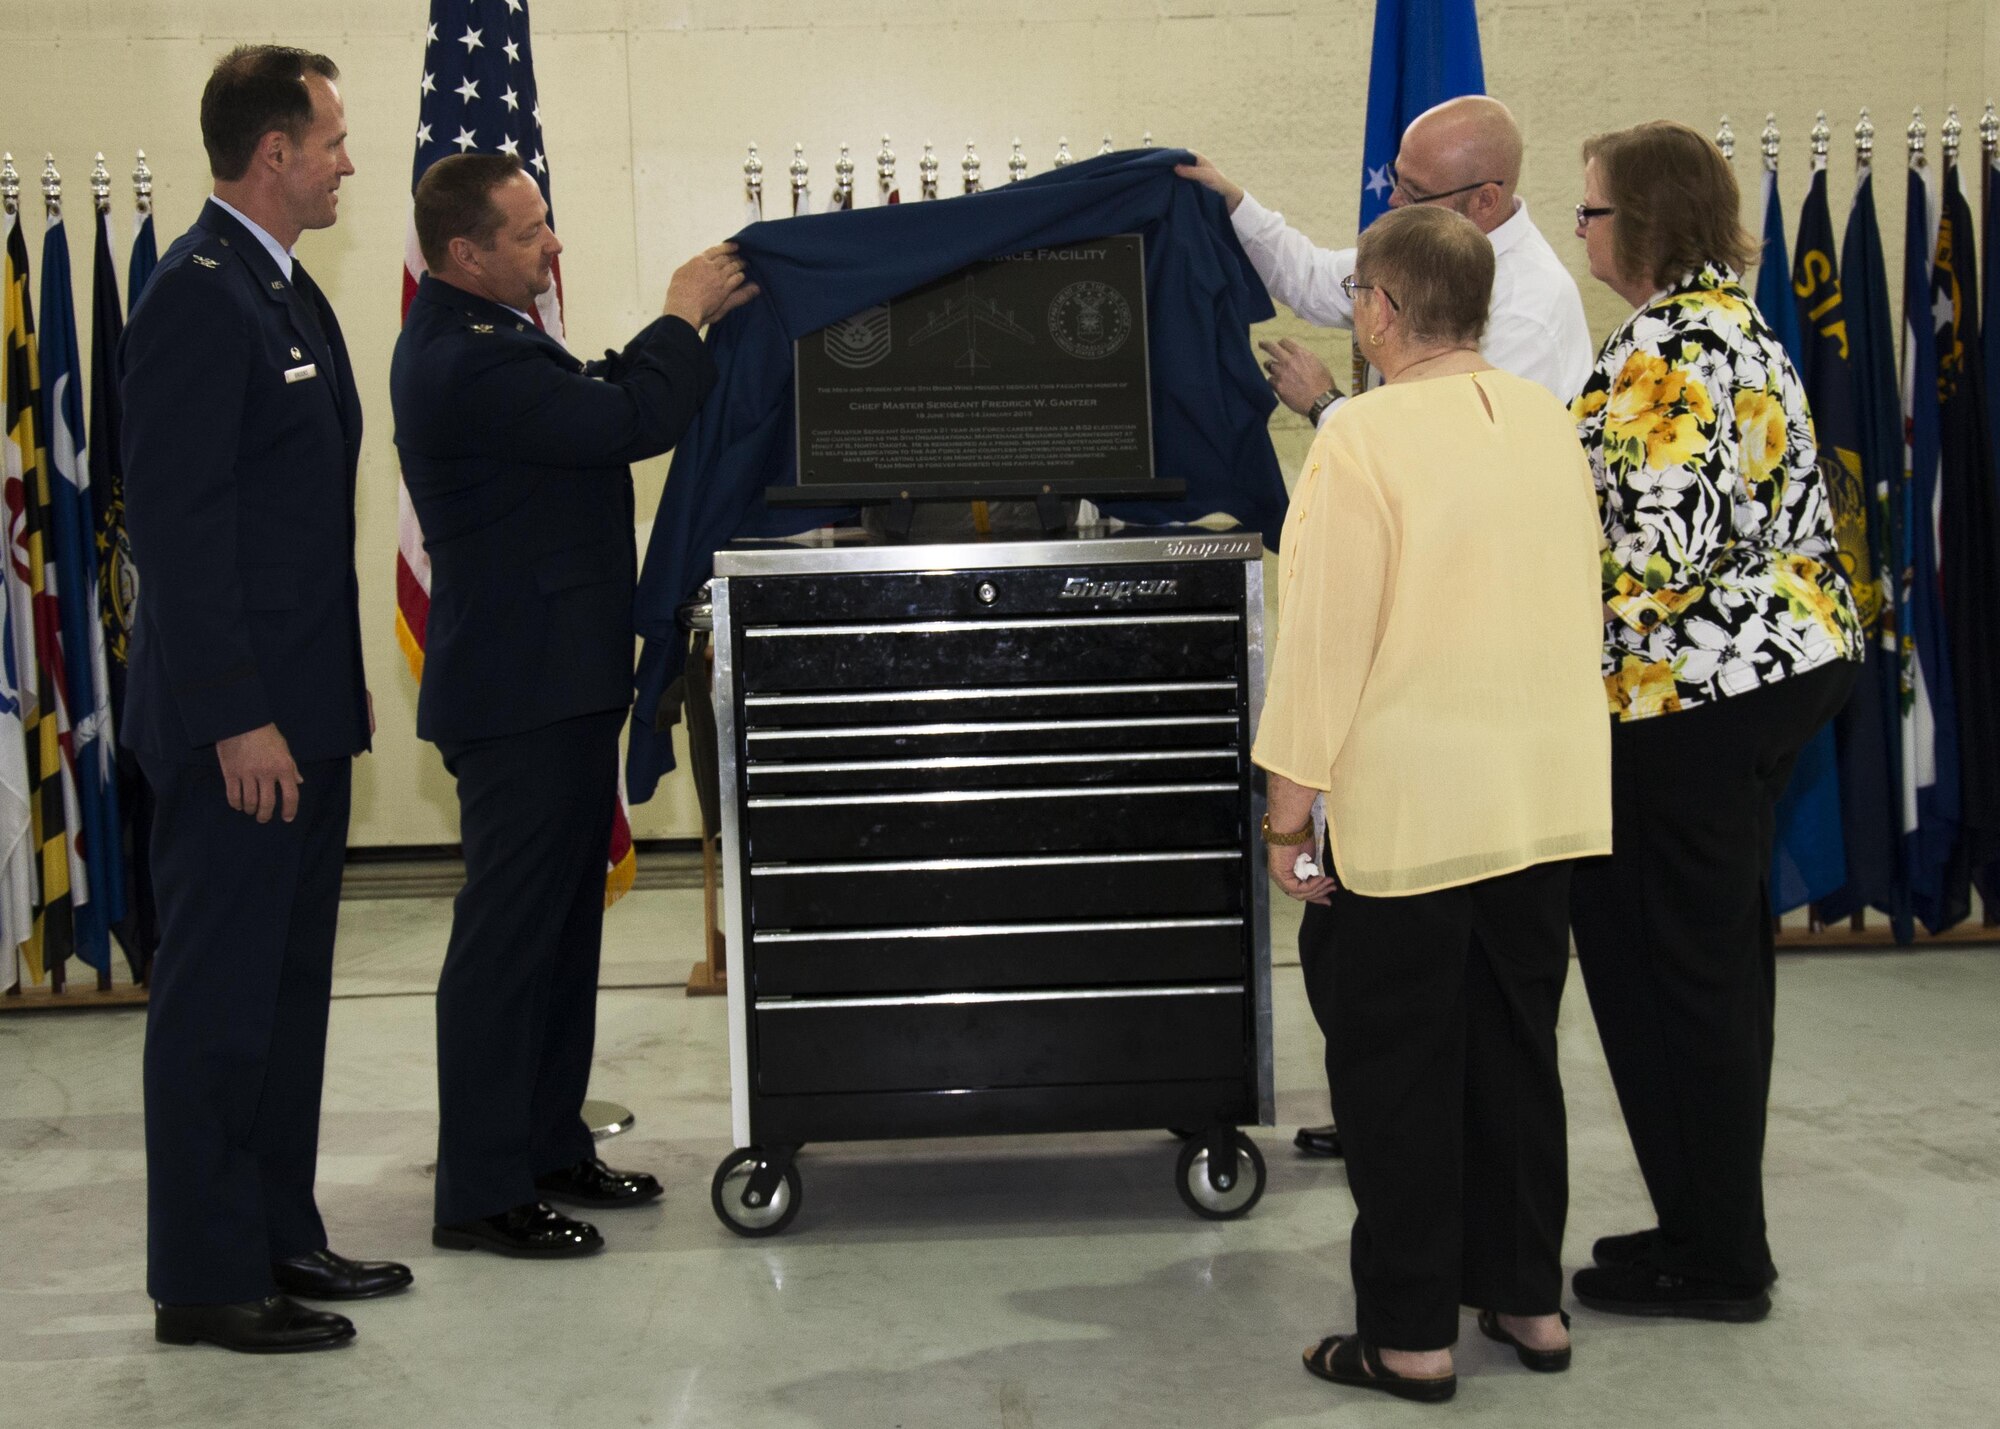 (From left) Col. Matthew Brooks, 5th Bomb Wing commander, Col. Thomas Kirkham, 5th Maintenance Group commander, and the Gantzer family unveil the dedication plaque during a ceremony at the Gantzer Maintenance Facility at Minot Air Force Base, N.D., April 21, 2017. Chief Master Sgt. Fredrick Gantzer was honored for his dedication, hard work and consistence in supporting the base and the community while serving at Minot AFB. (U.S. Air Force photo/Airman 1st Class Alyssa M. Akers)